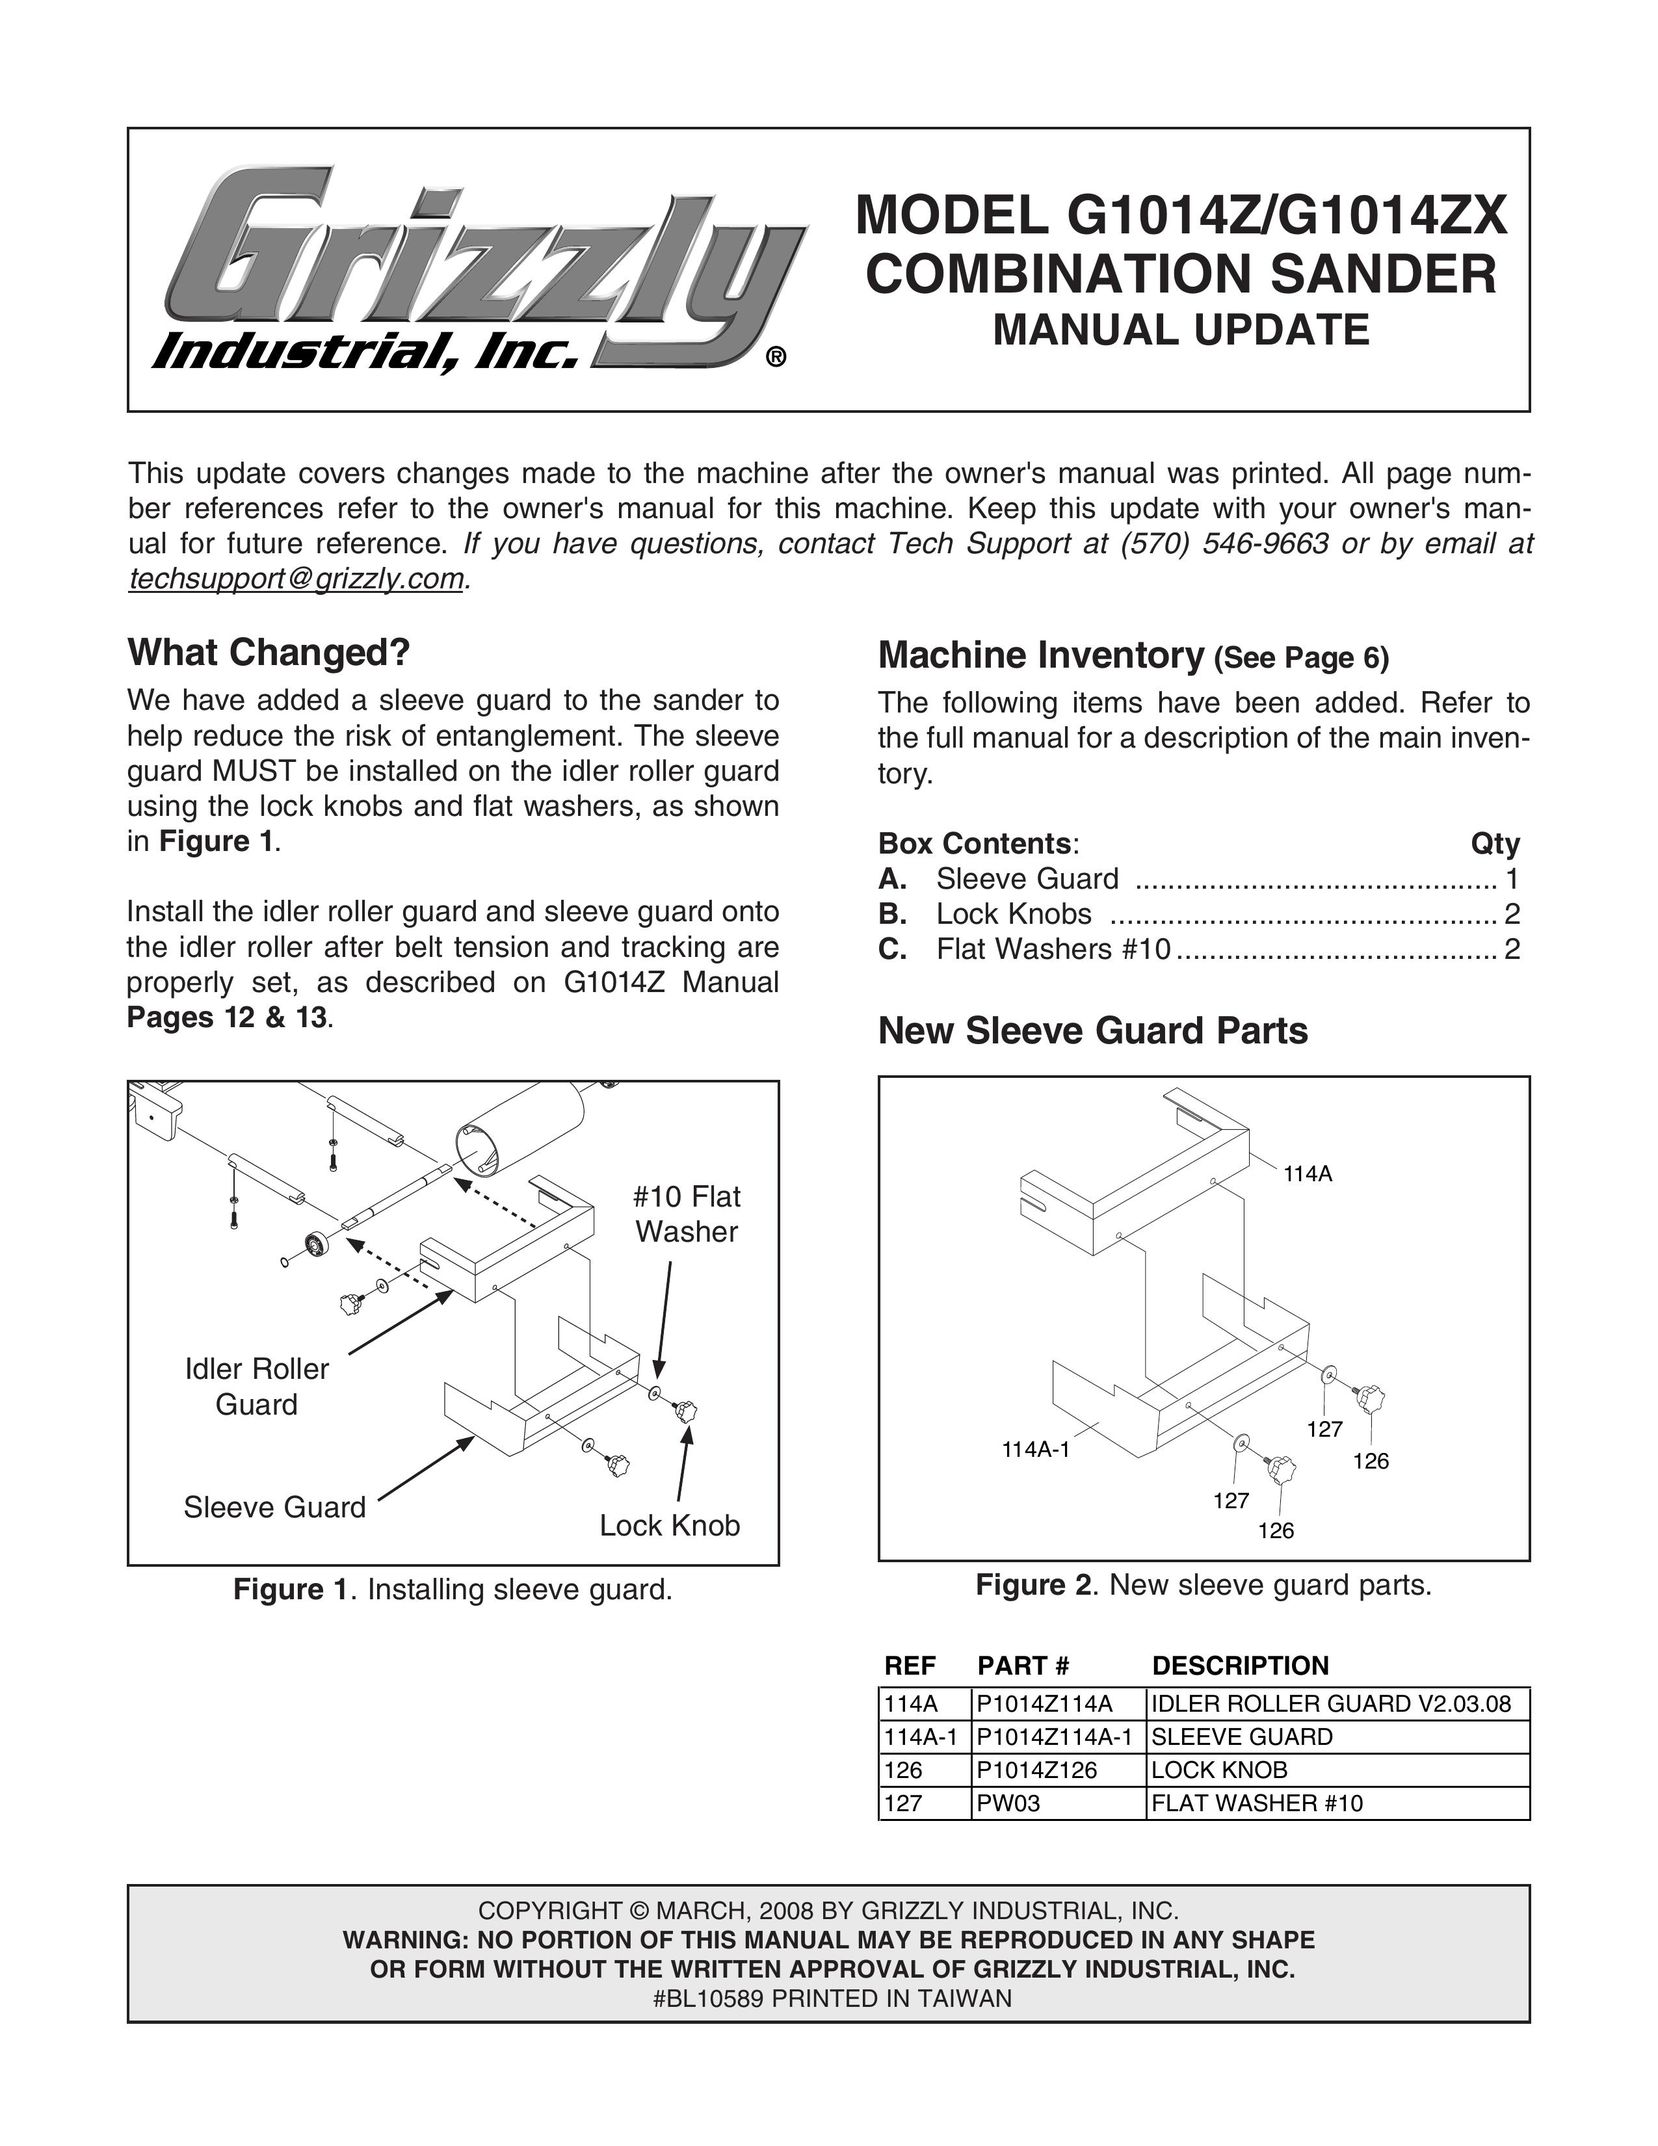 Grizzly G1014ZX TV VCR Combo User Manual